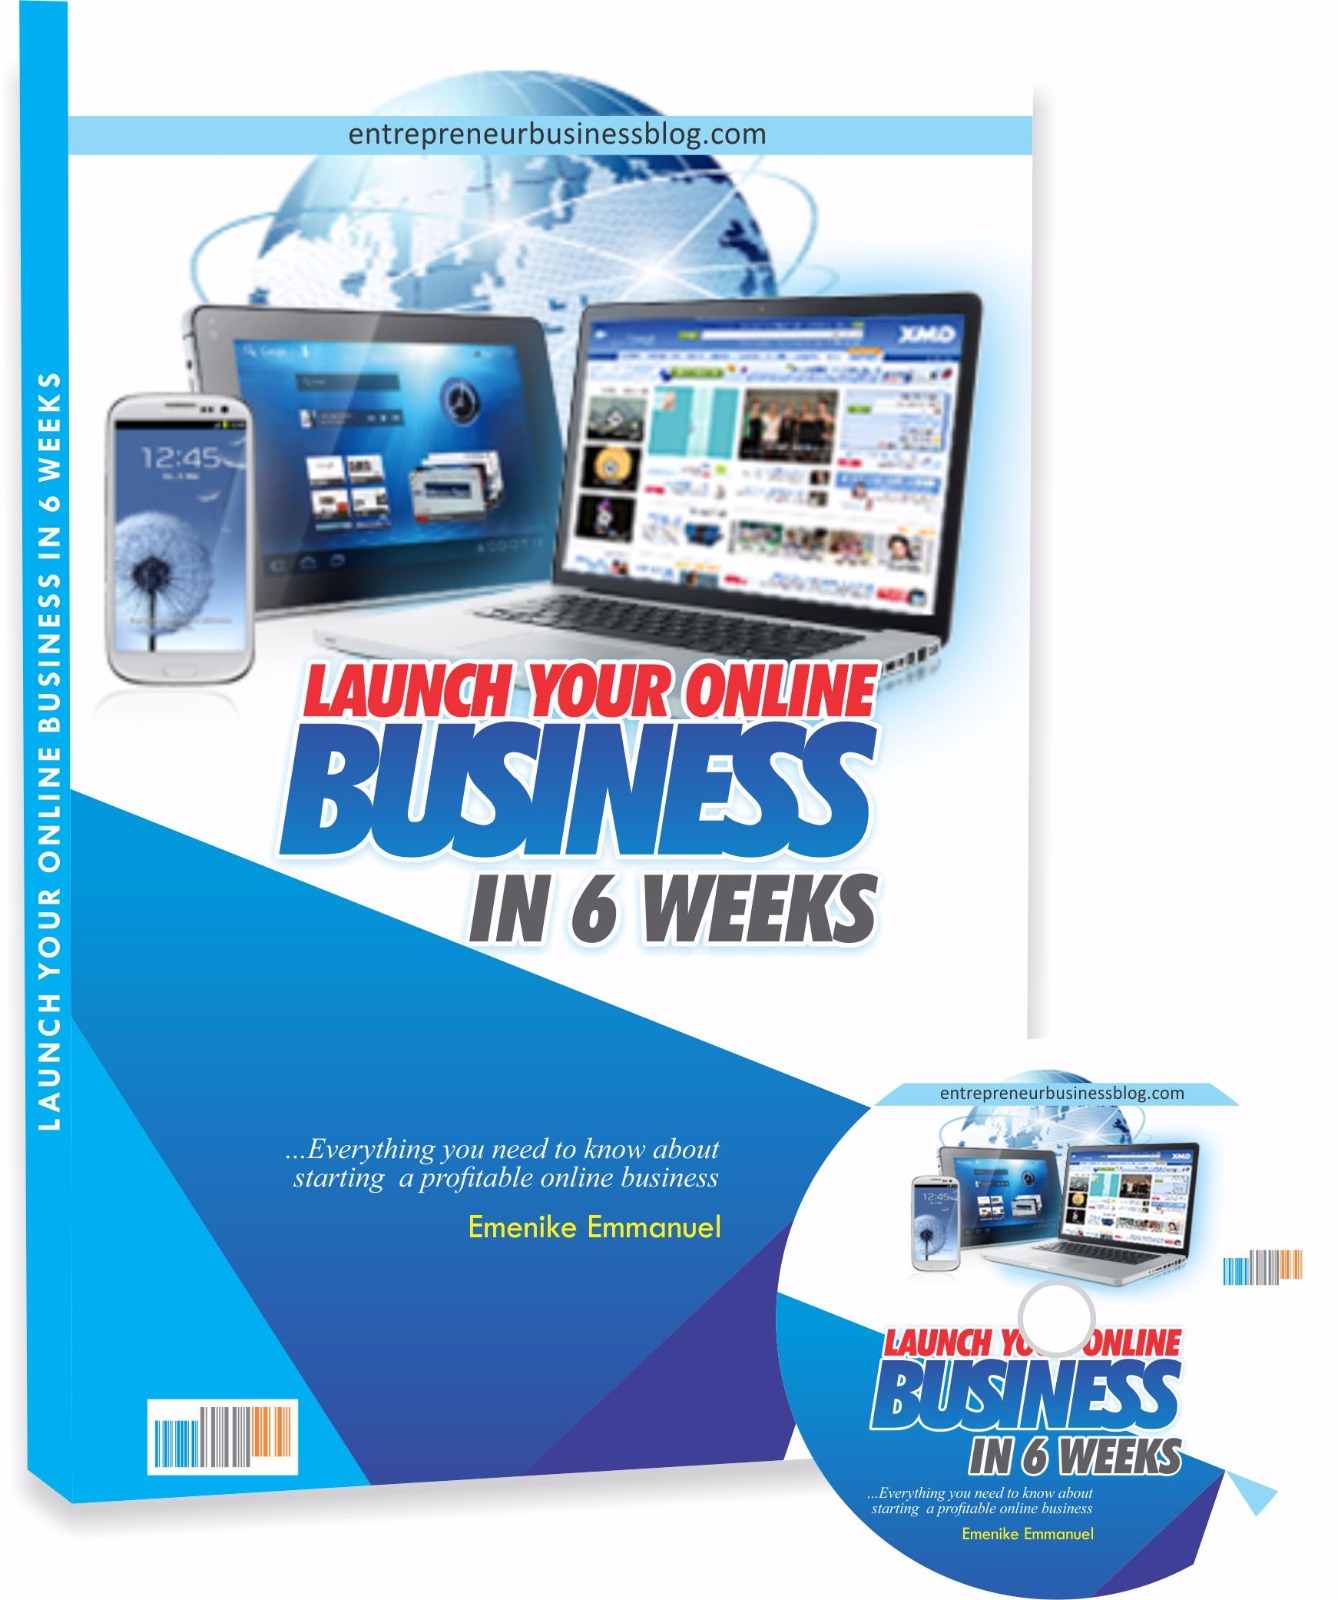 Launch your online business in 6 weeks